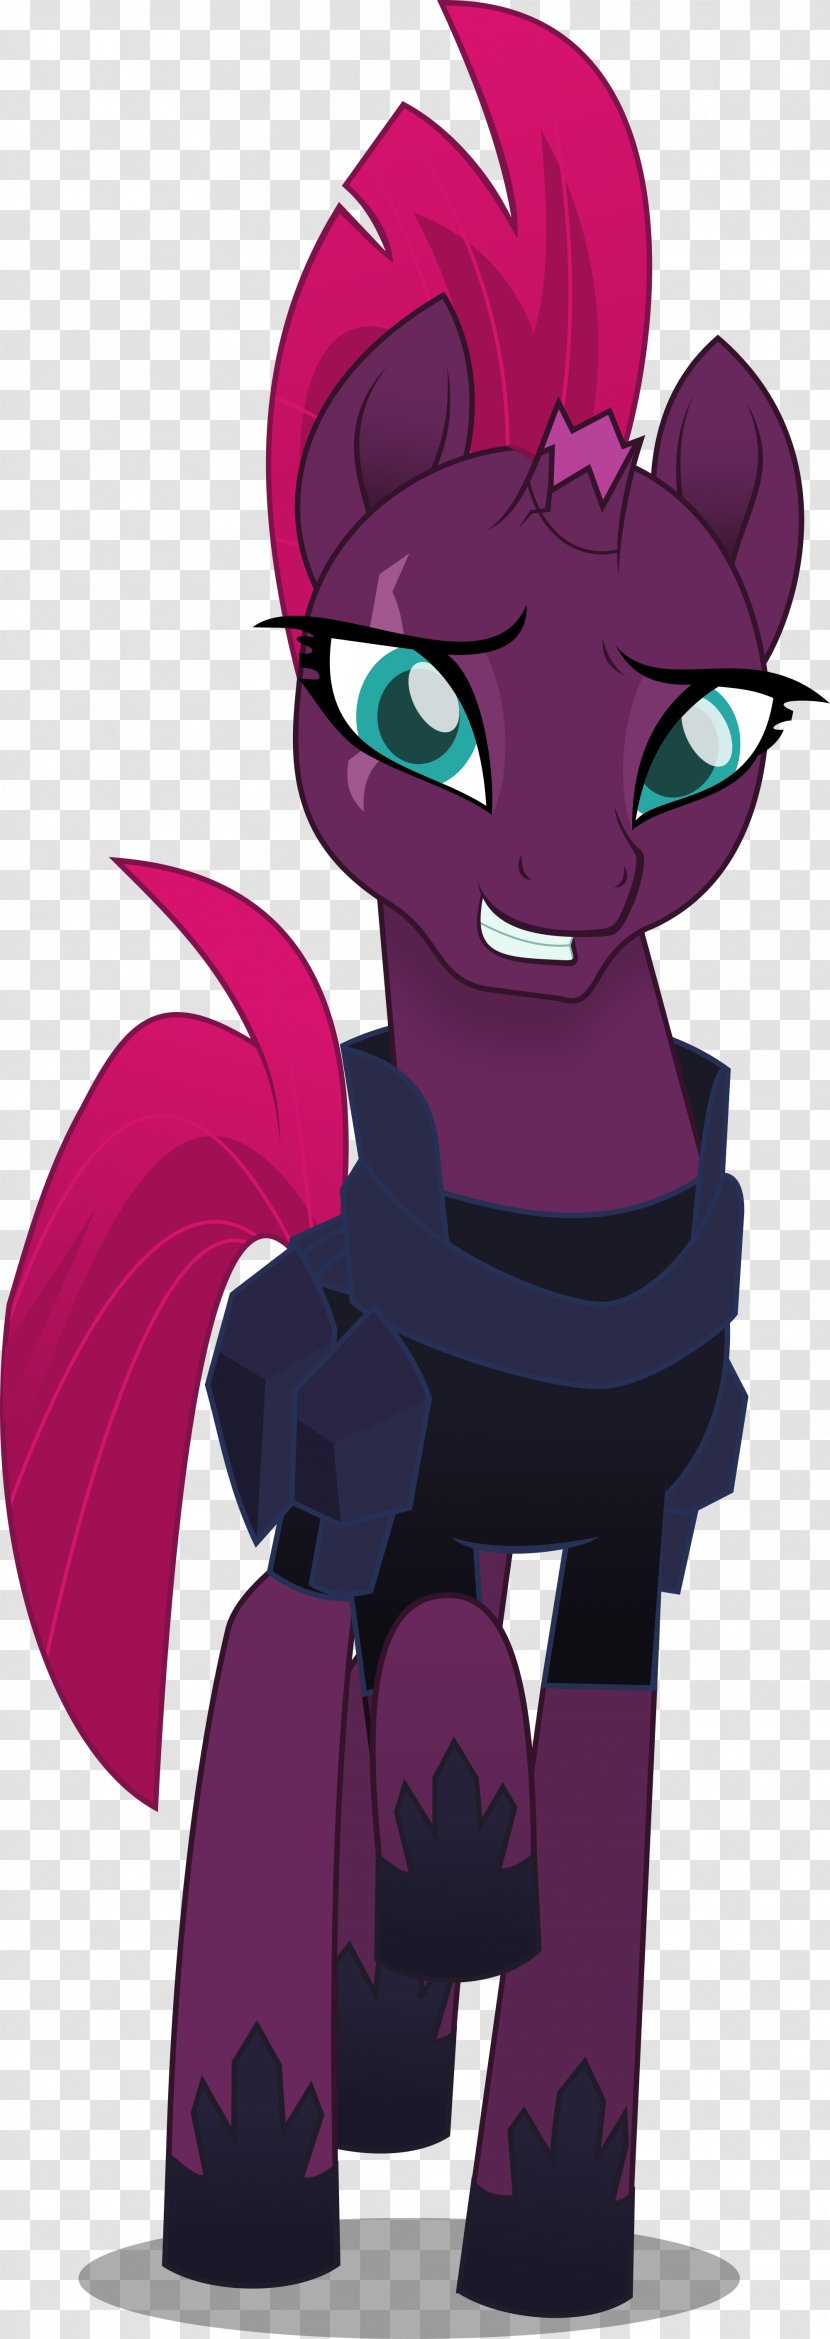 Tempest Shadow Rarity The Storm King Pony Sunset Shimmer - My Little Friendship Is Magic - Canterlot Transparent PNG